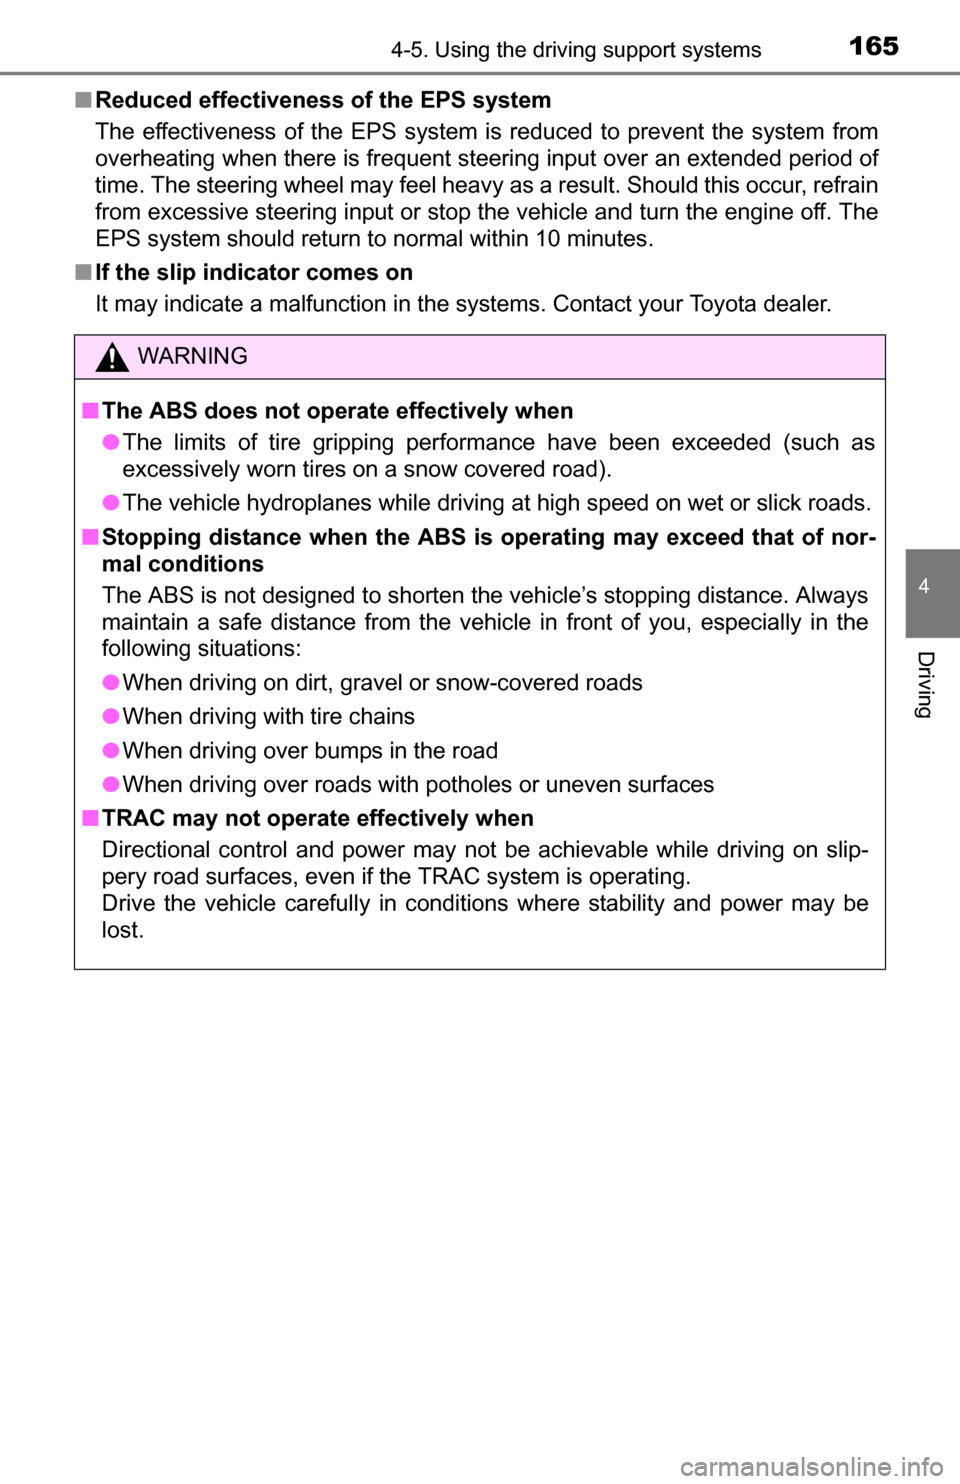 TOYOTA YARIS 2016 3.G Owners Manual 1654-5. Using the driving support systems
4
Driving
■Reduced effectiveness of the EPS system
The effectiveness of the EPS system is reduced to prevent the system from
overheating when there is frequ